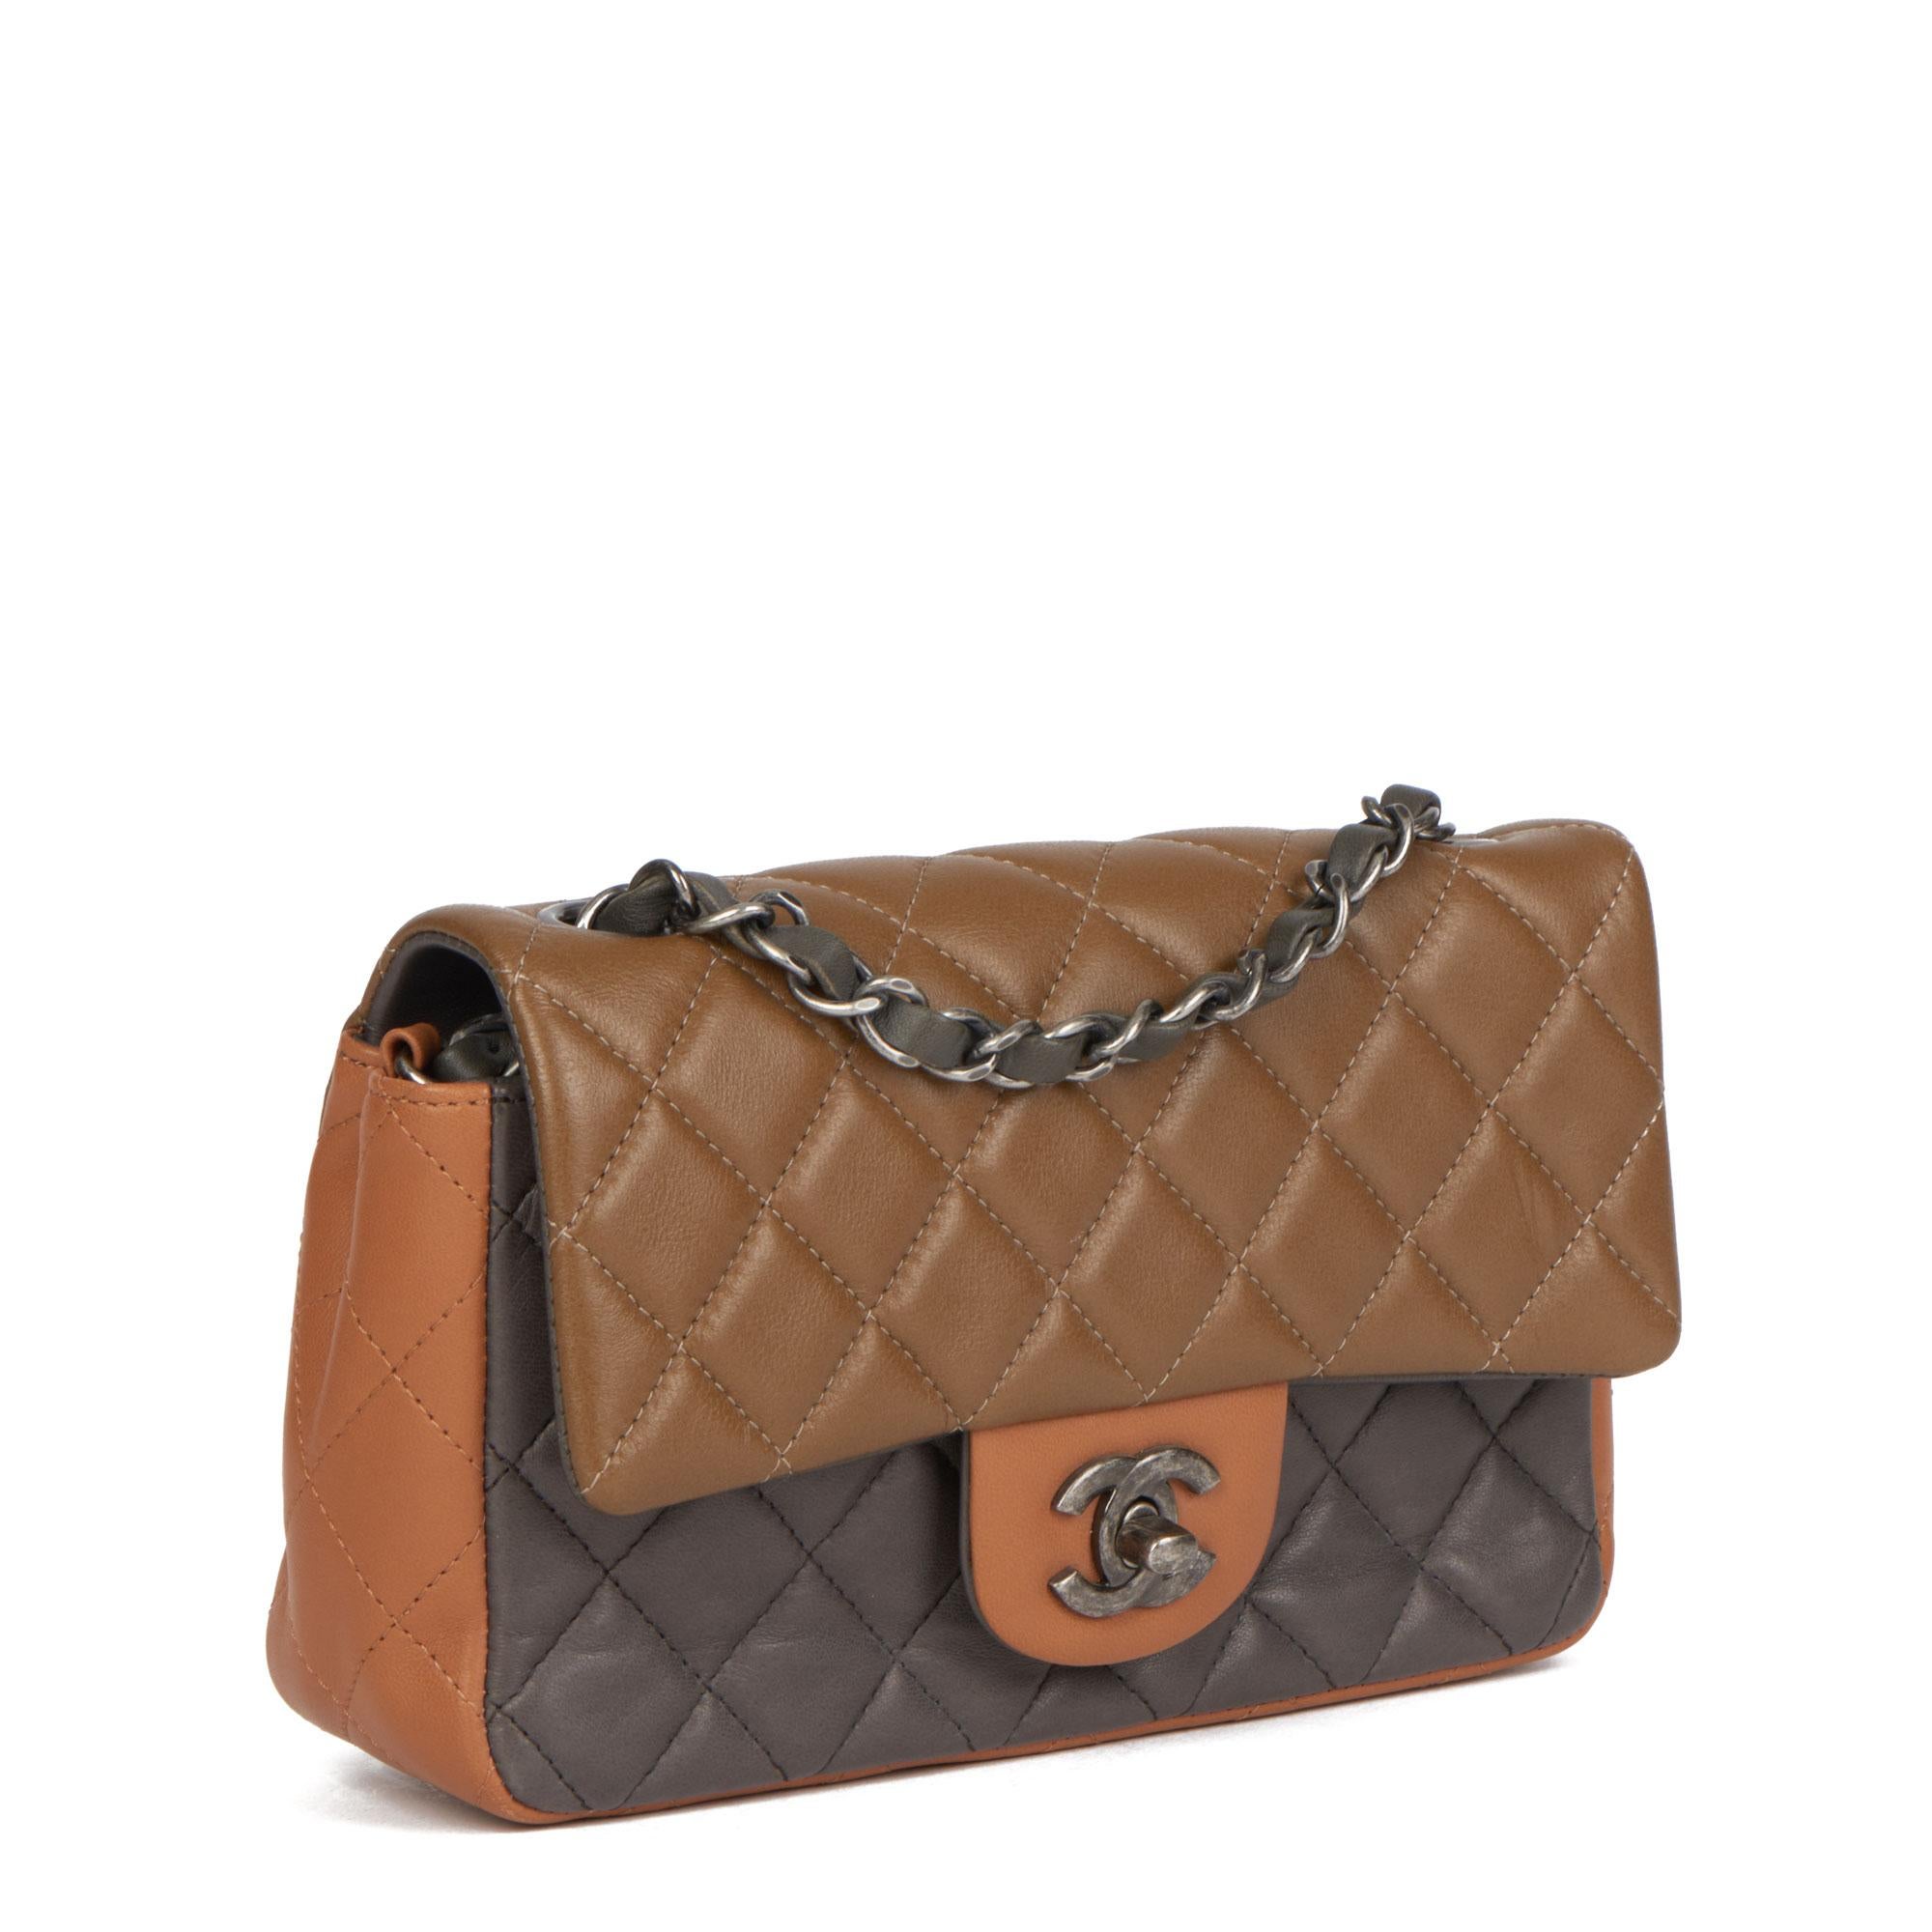 Chanel KHAKI, GREY & DARK BEIGE QUILTED LAMBSKIN RECTANGULAR MINI FLAP BAG


CONDITION NOTES
The exterior is in excellent condition with minimal signs of use.
The interior is in excellent condition with minimal signs of use.
The hardware is in